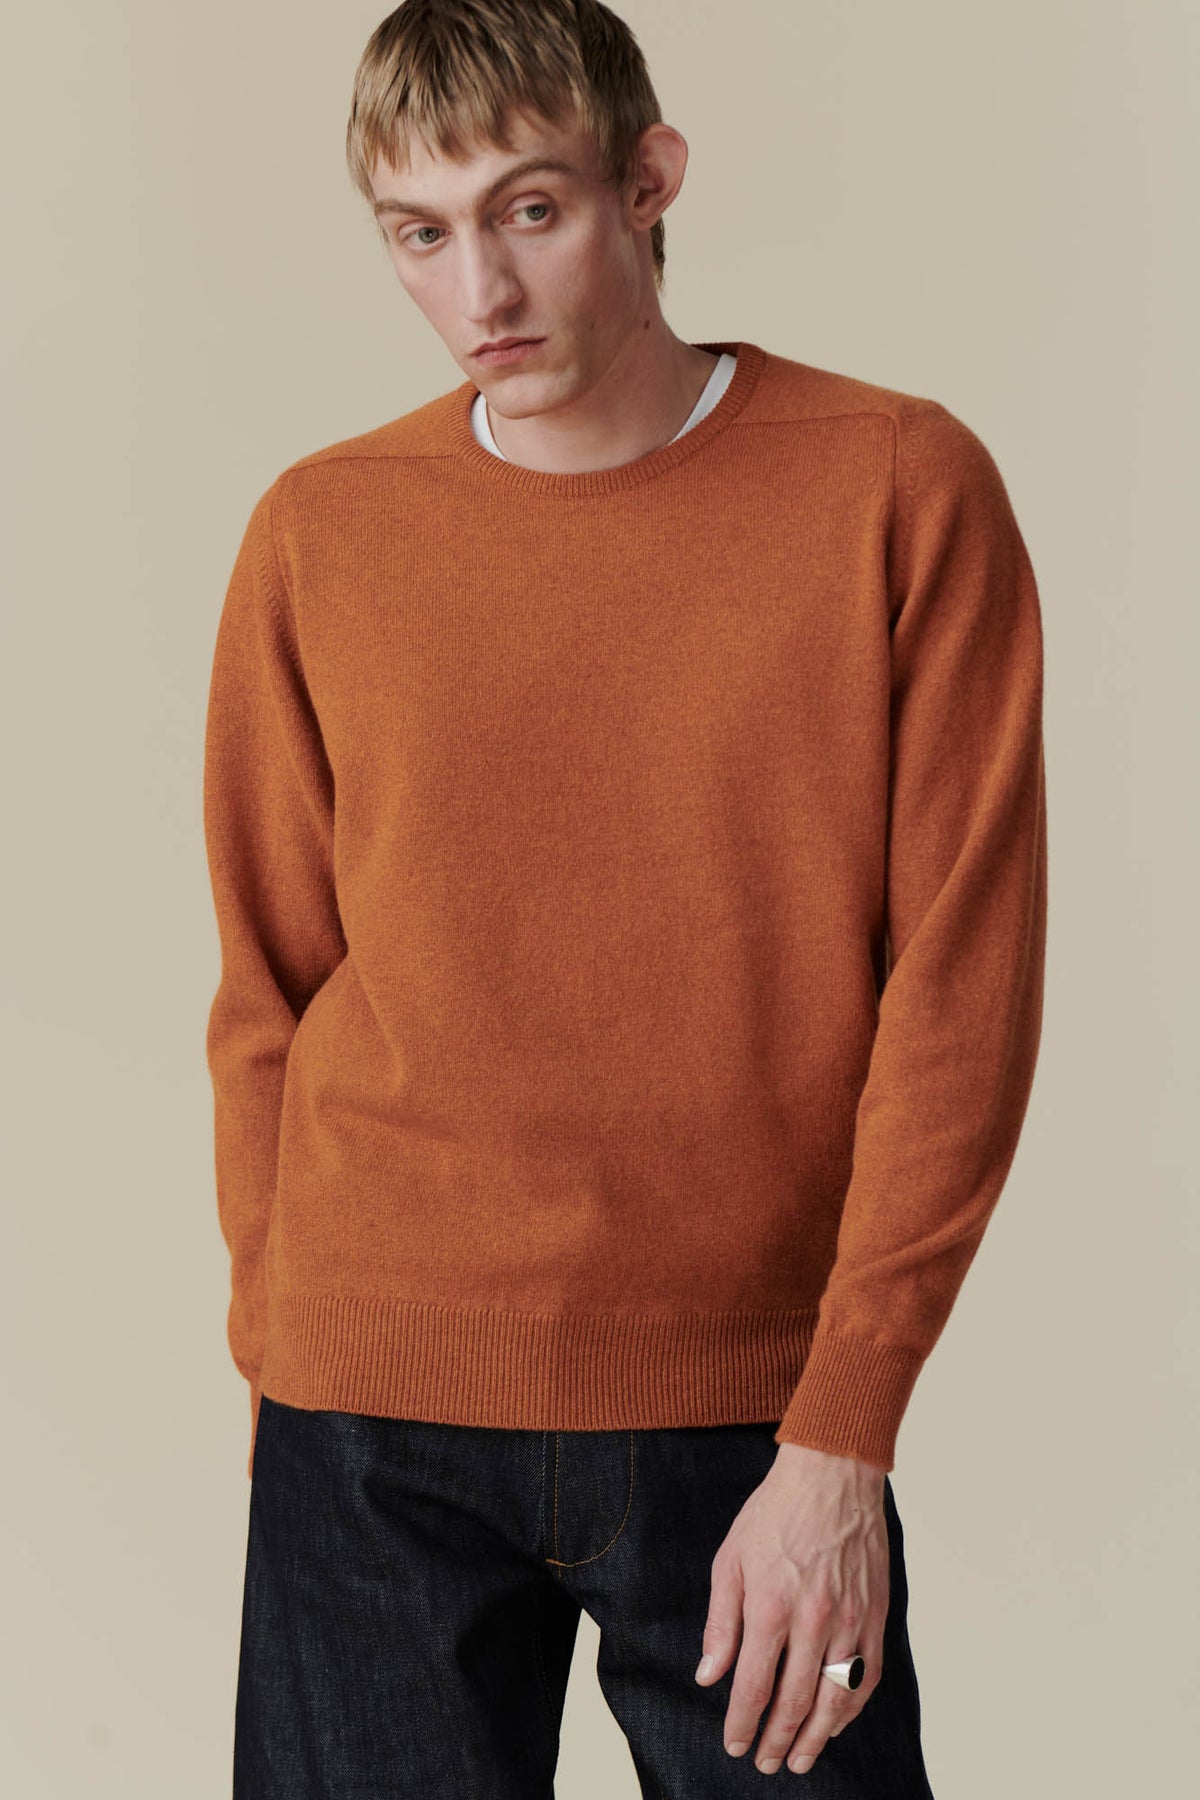 
            Thigh up image of dirty blonde, white male wearing lambswool saddle shoulder crew neck in rust